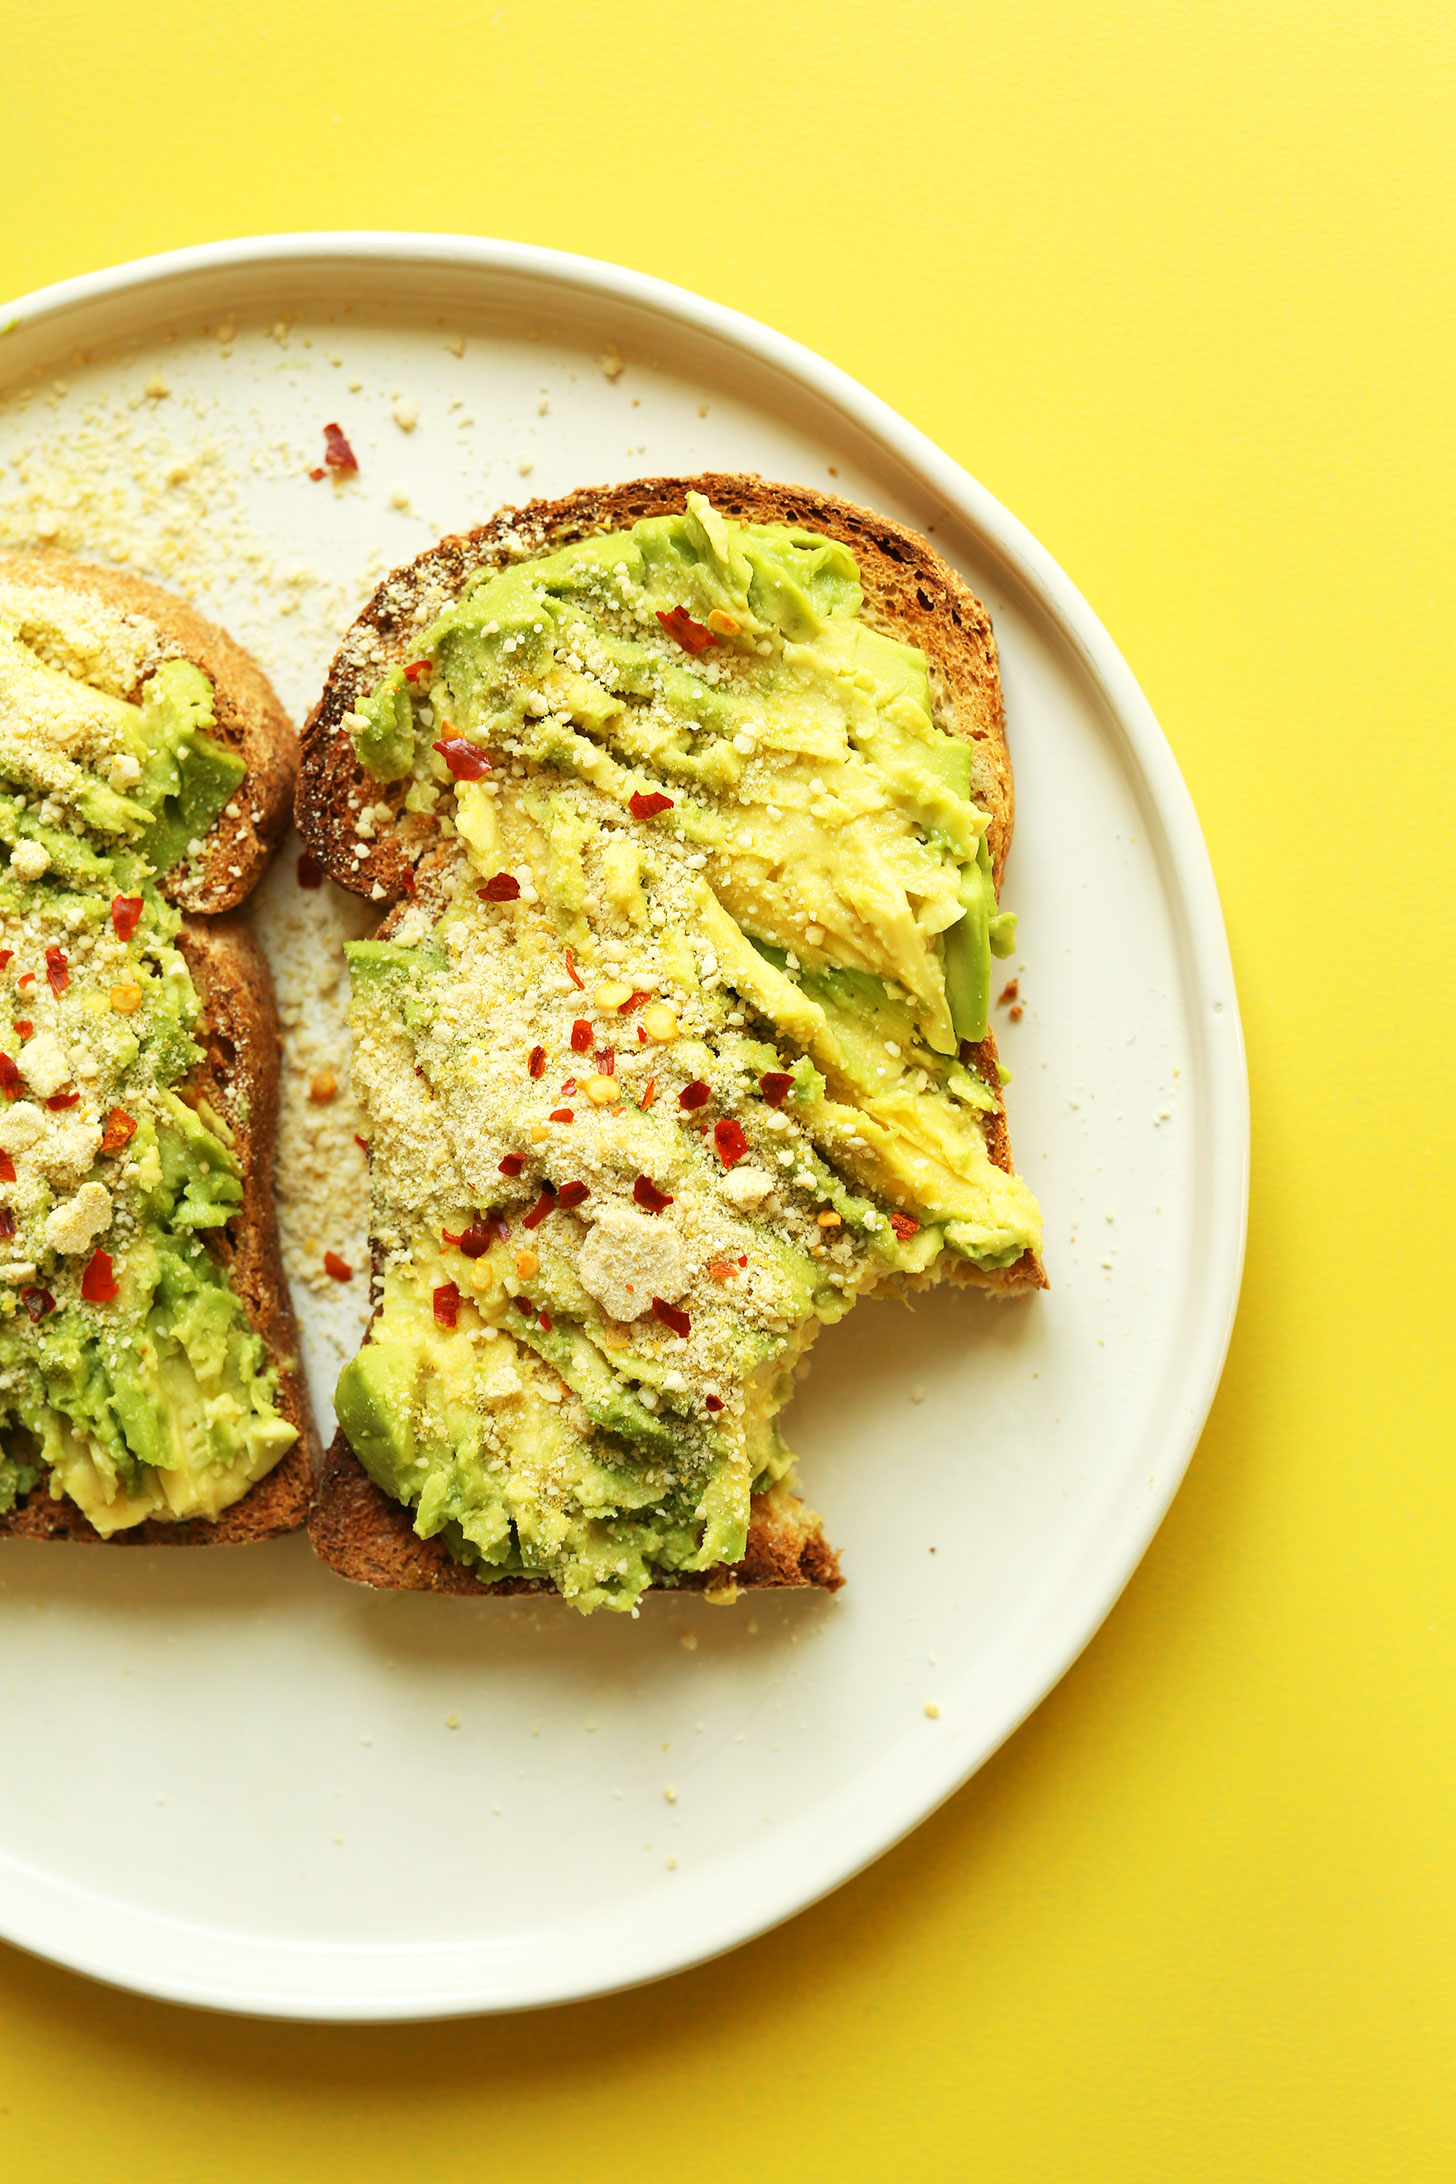 Plate of gluten-free avocado toast topped with vegan parmesan and red pepper flake